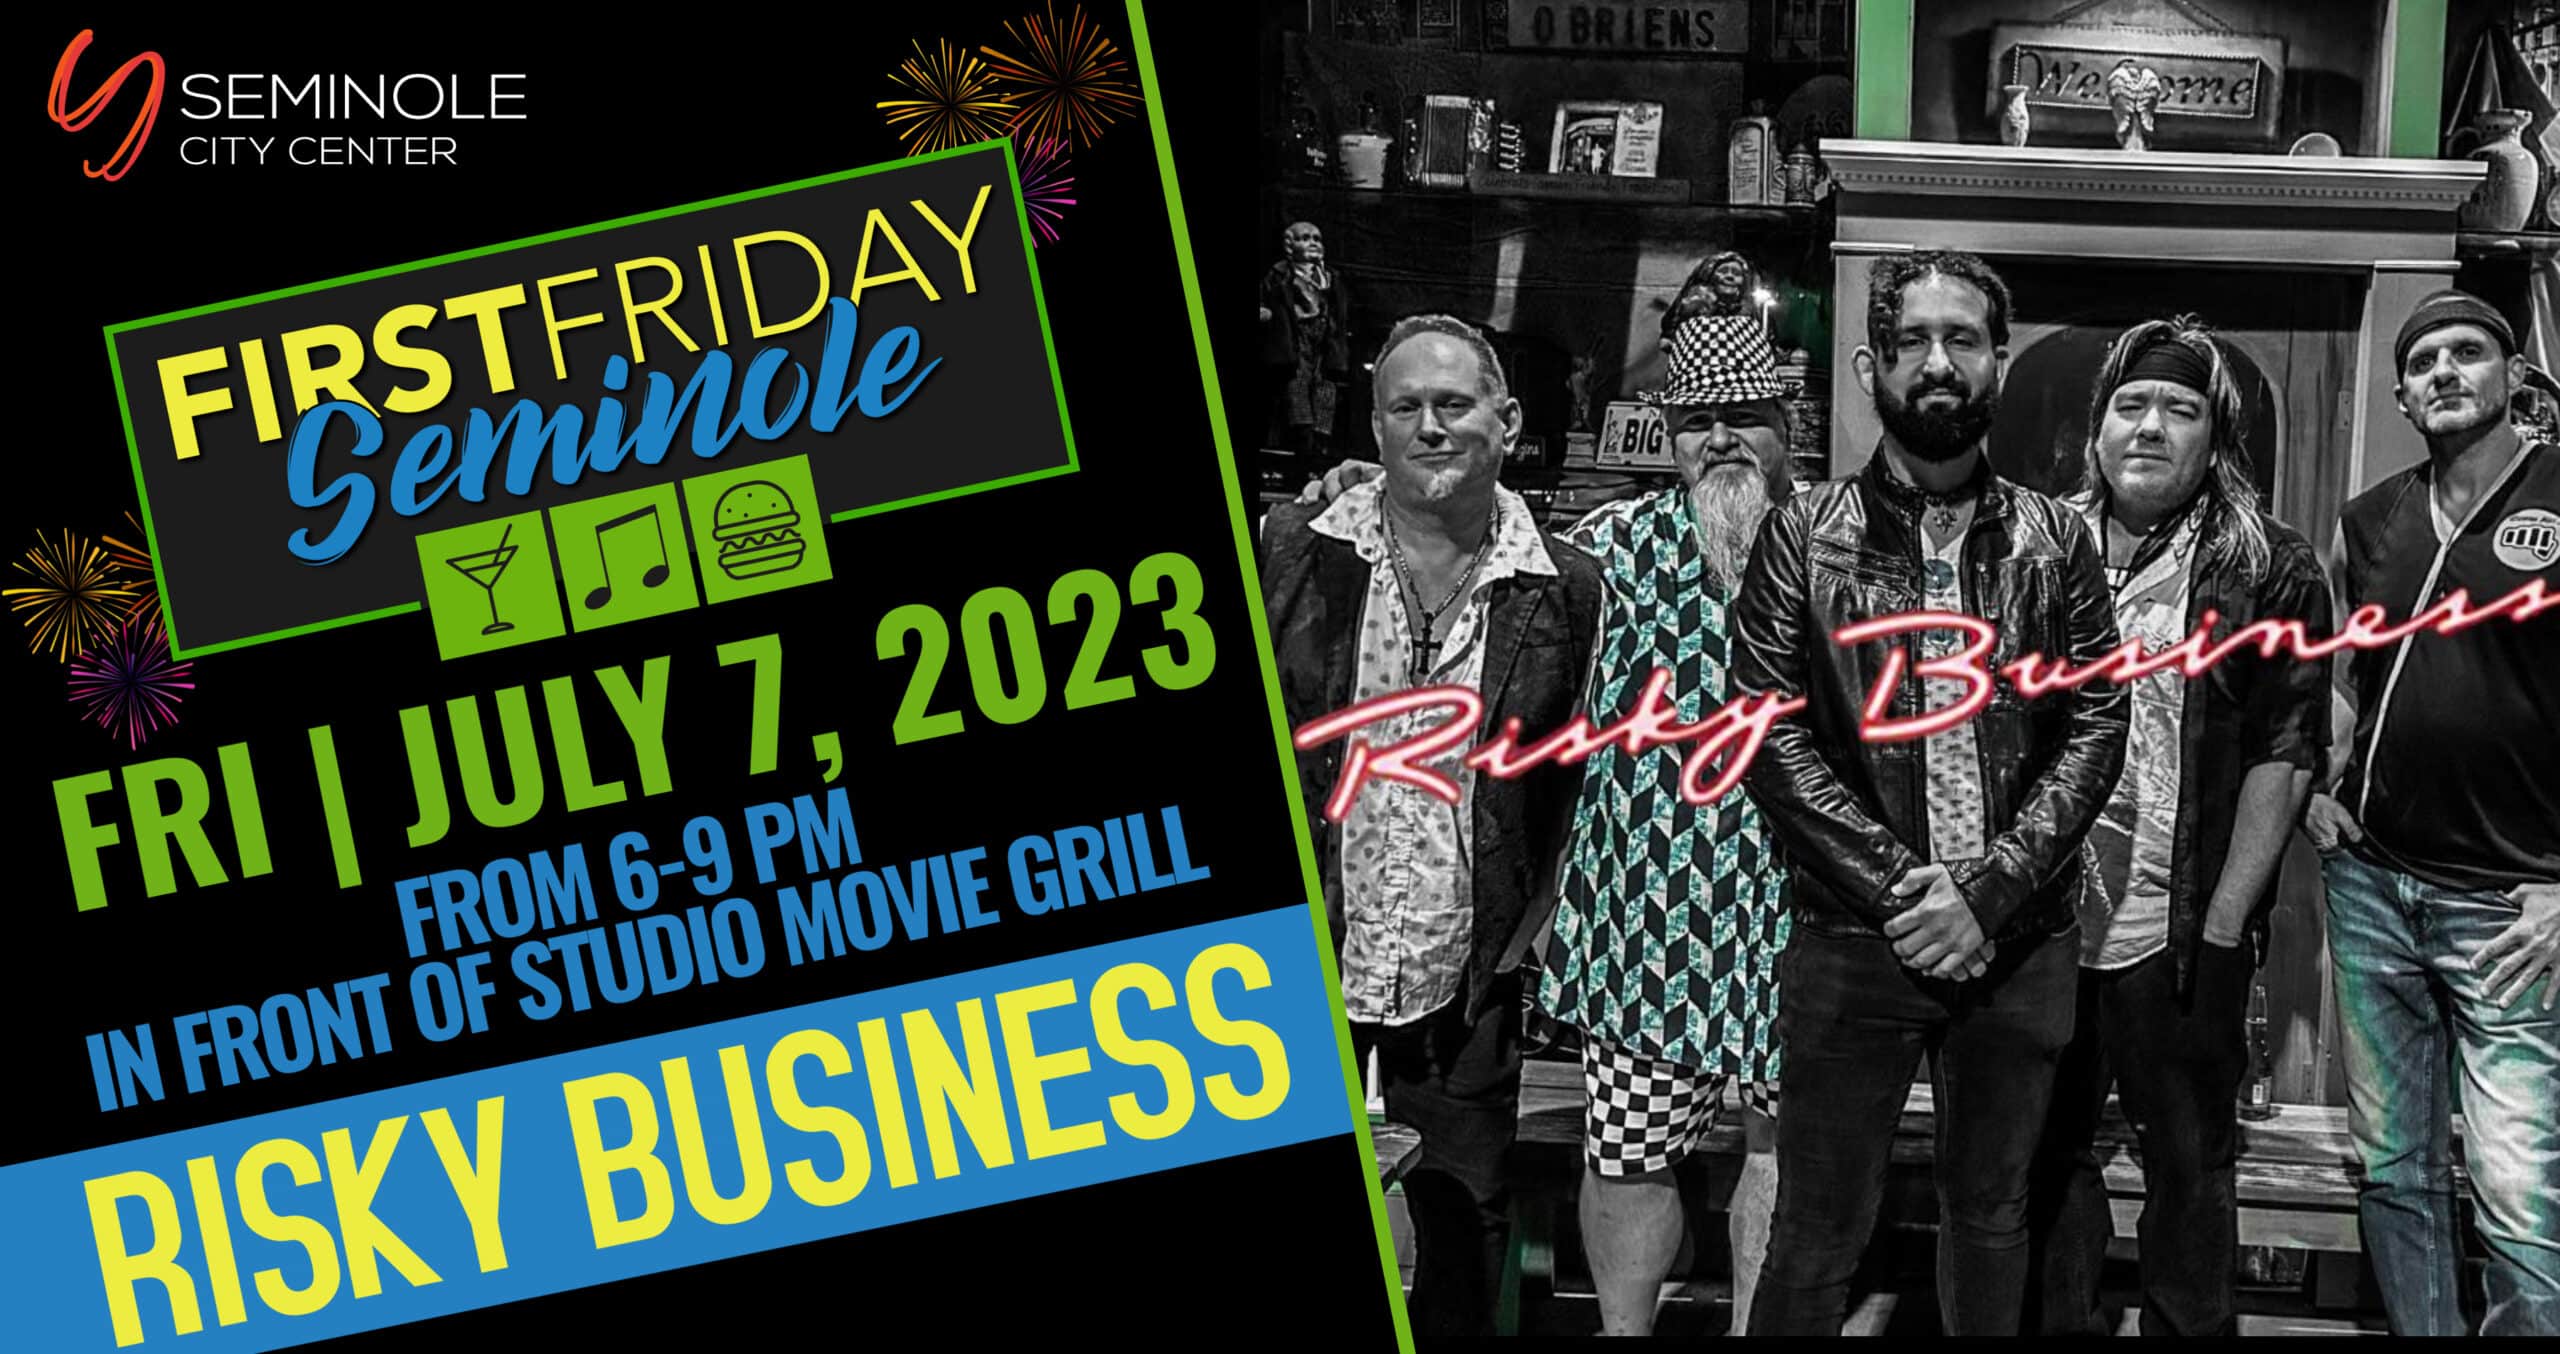 Celebrate America with First Friday Seminole Risky Business Band